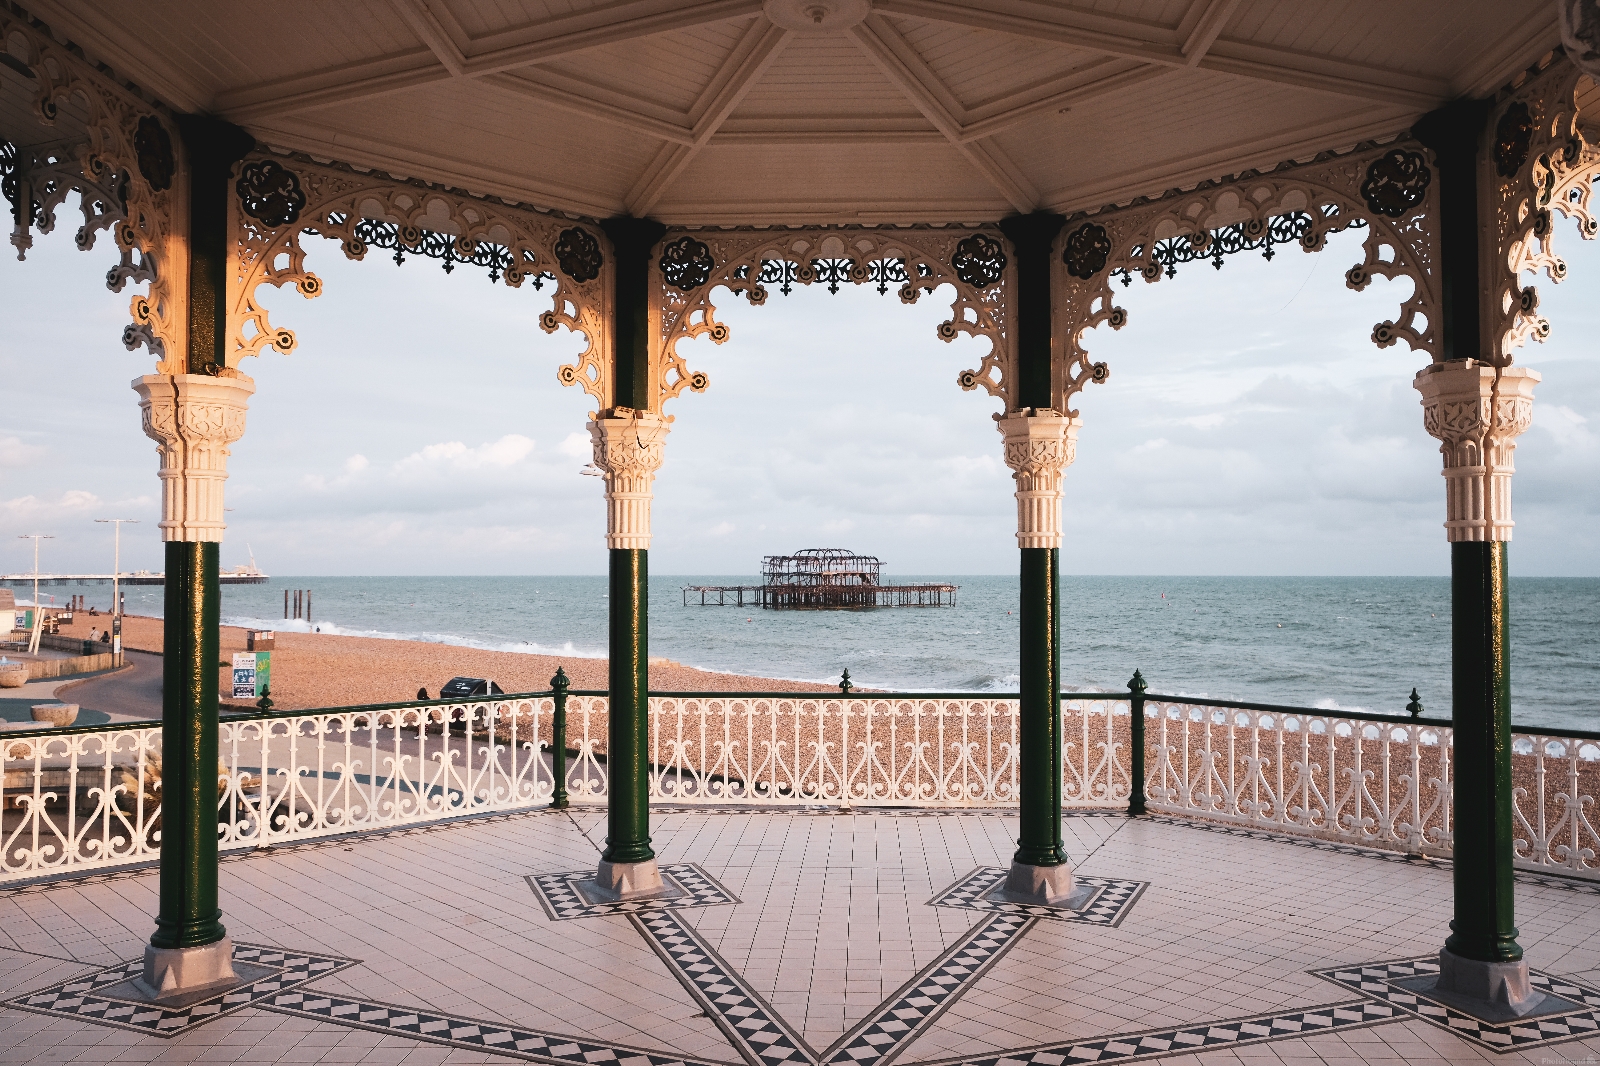 Image of Brighton Bandstand by Jonny Brown